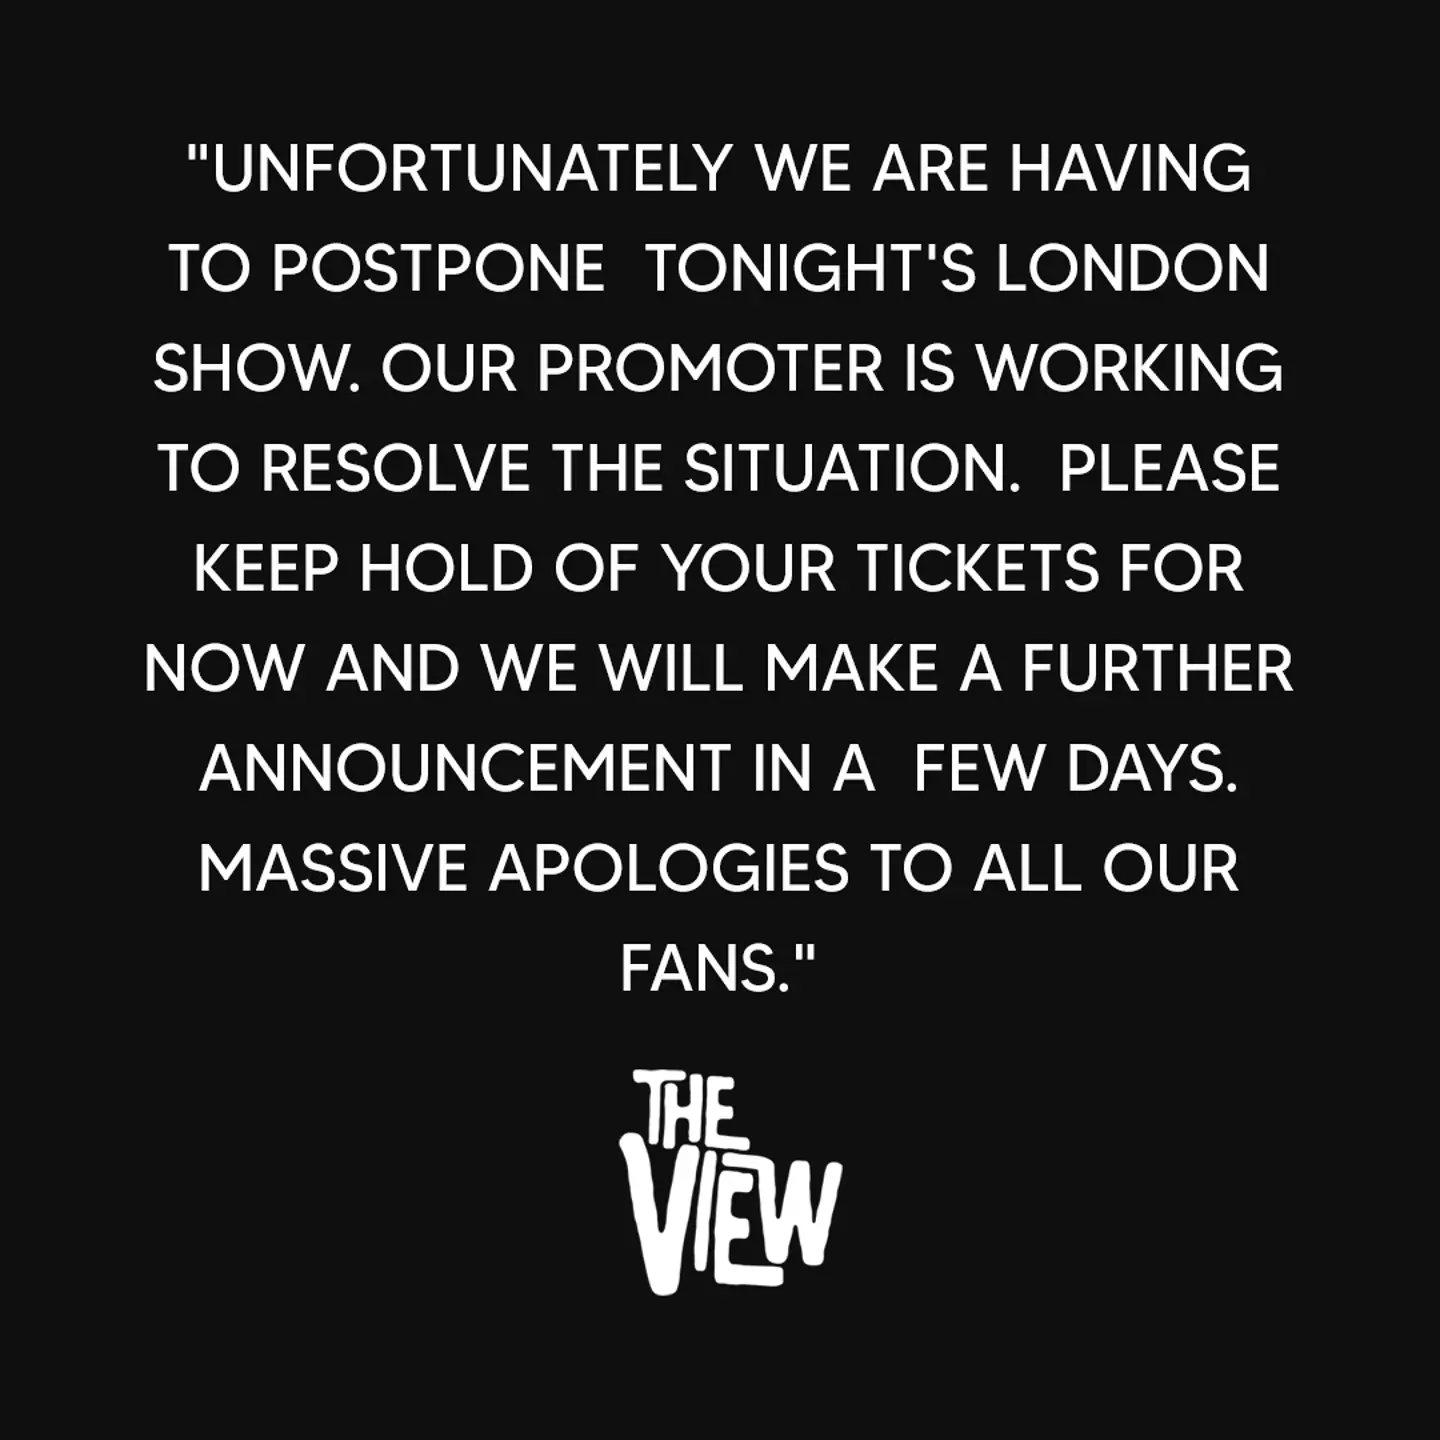 The View has issued a statement online.